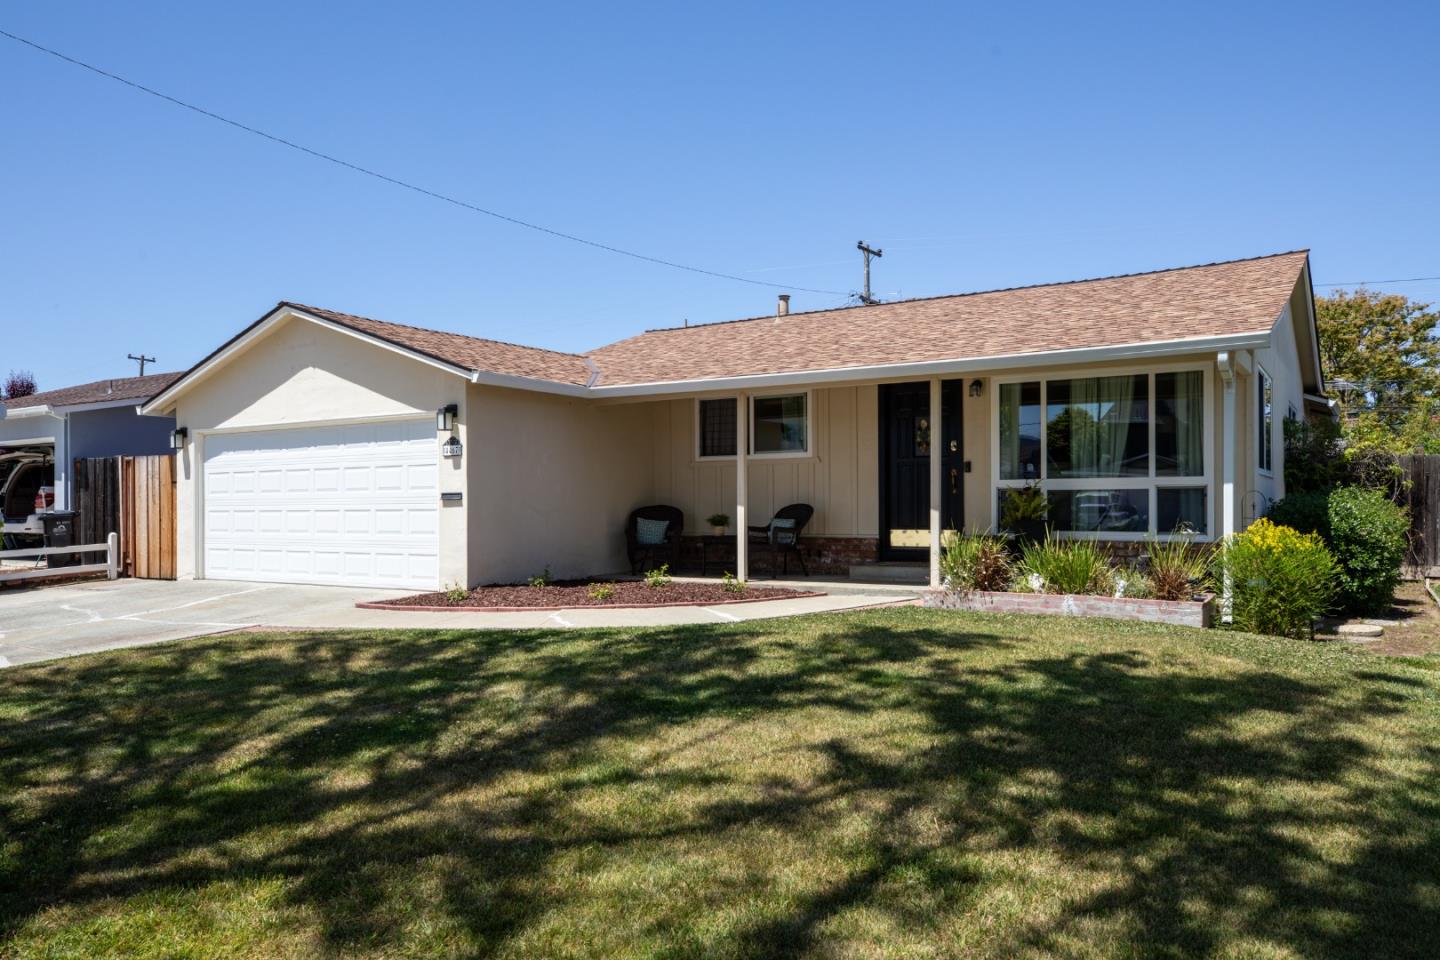 Photo of 4467 Grimsby Dr in San Jose, CA